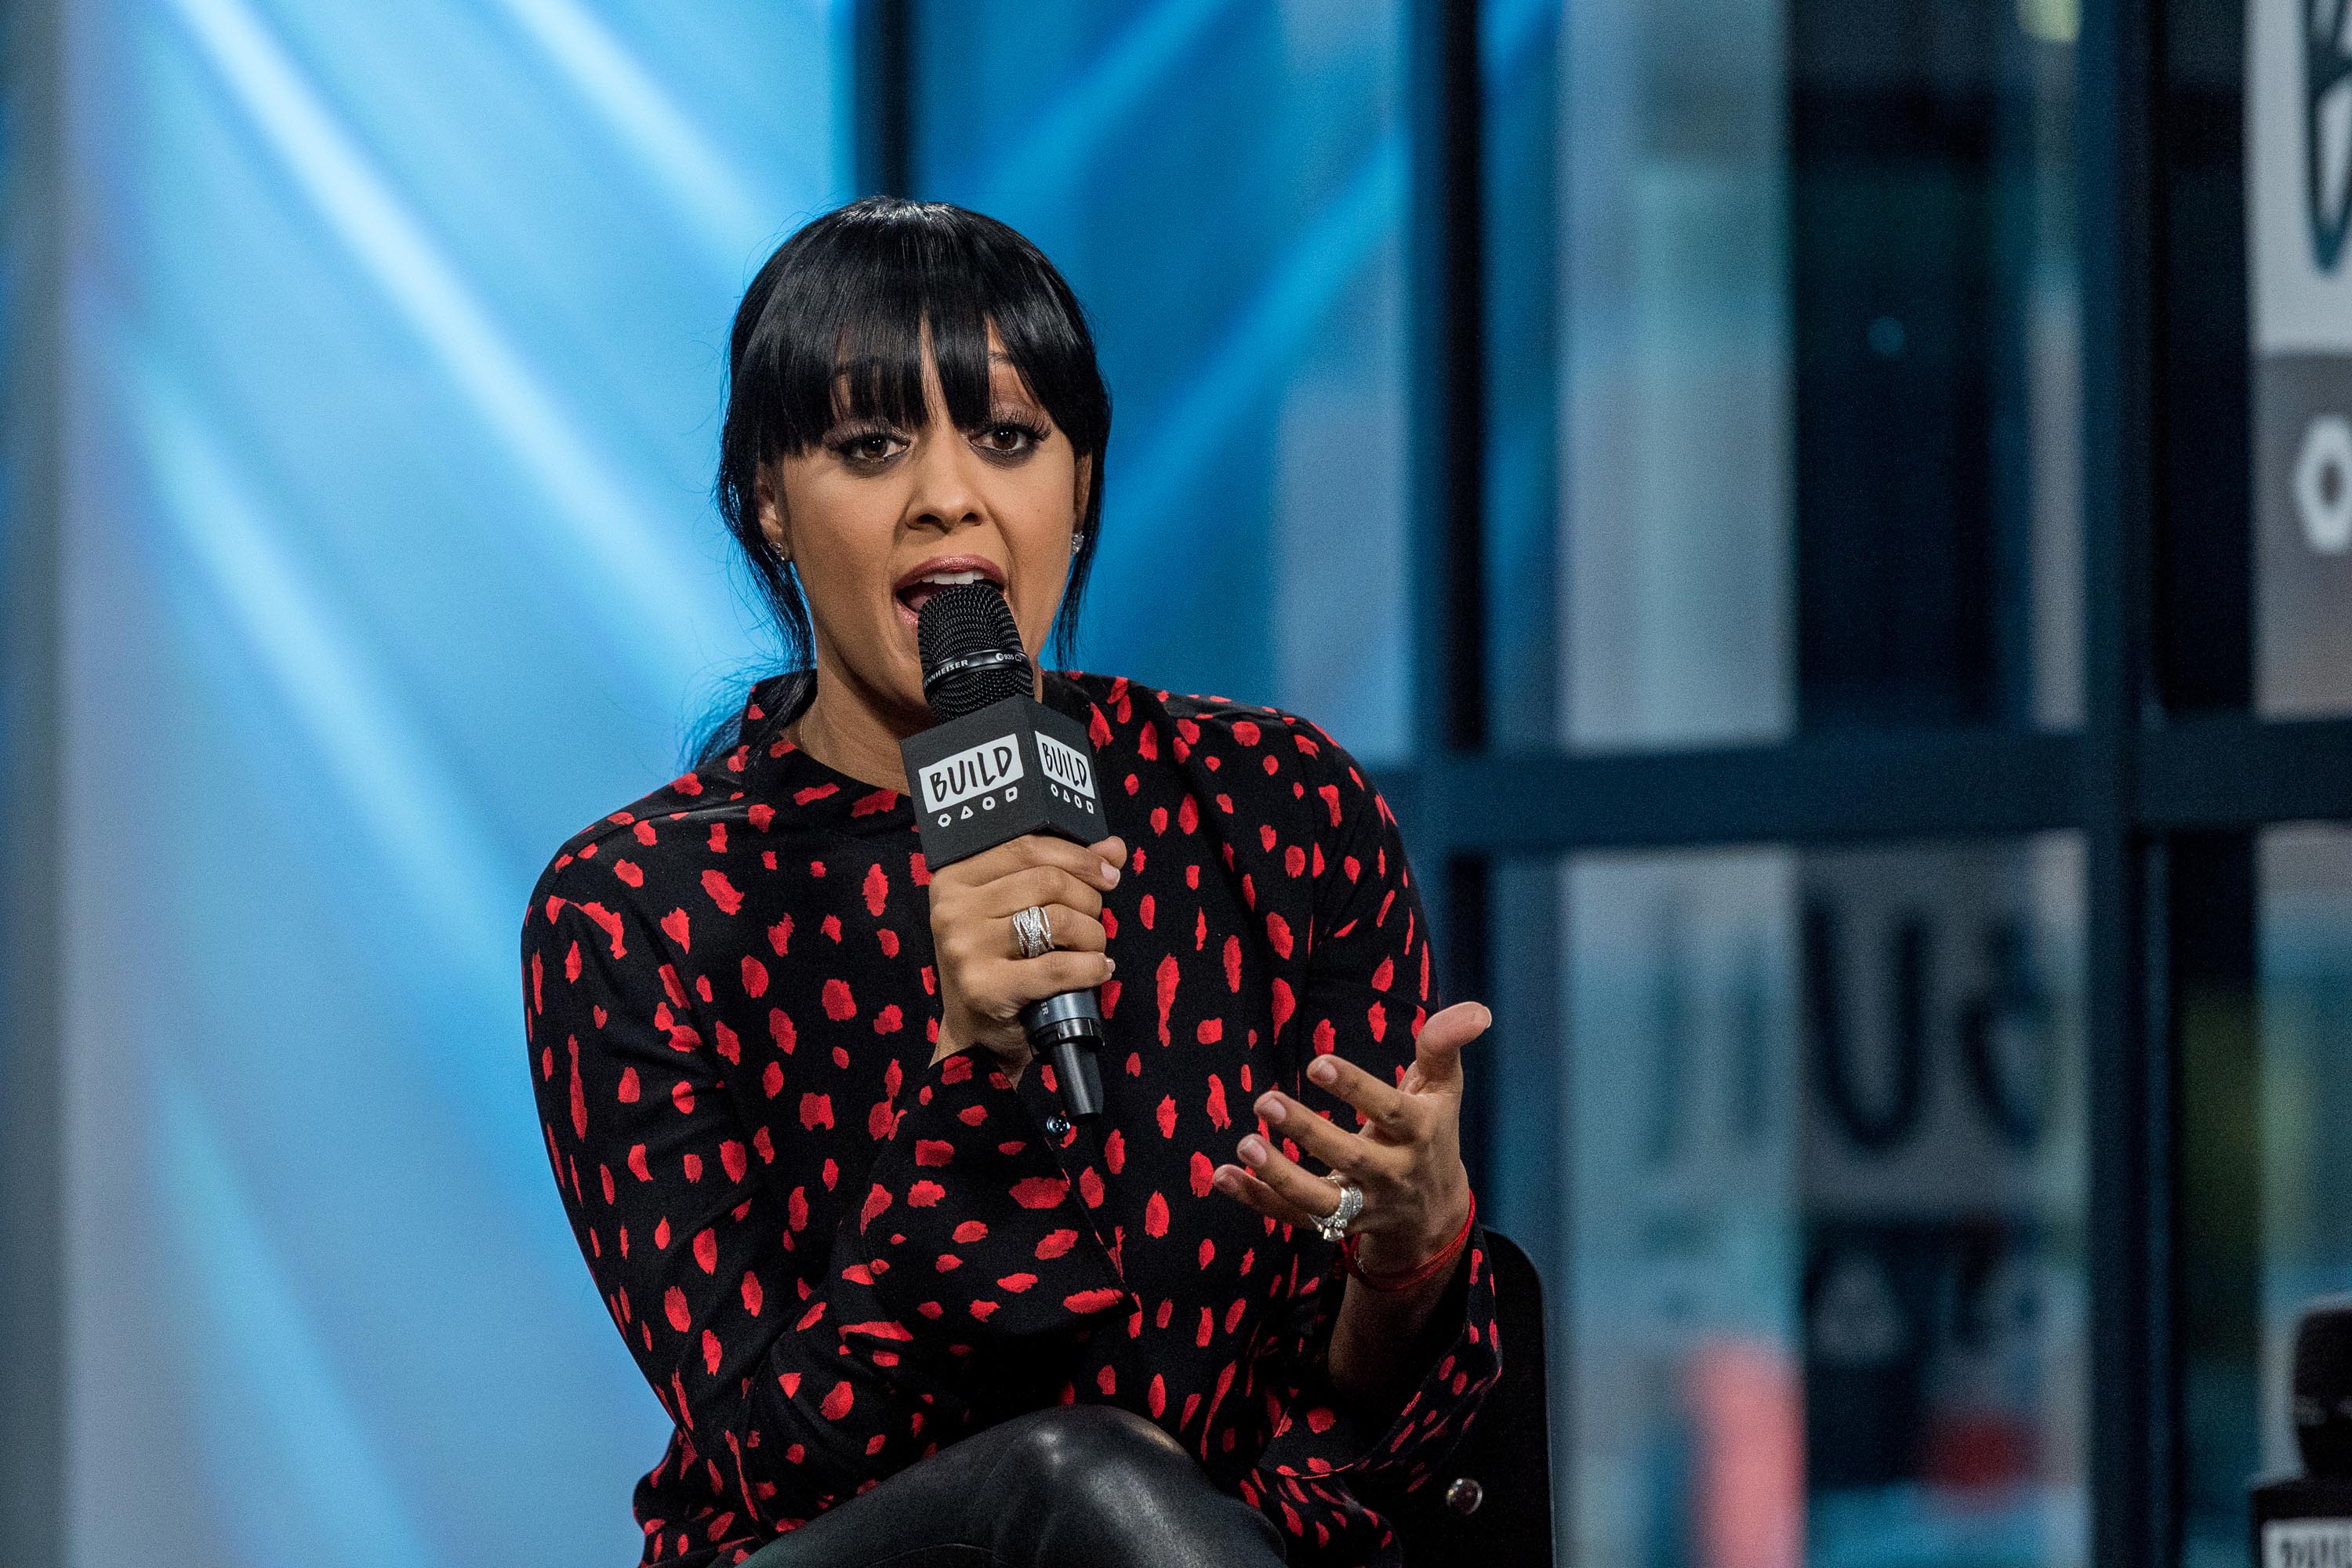 Tia Mowry attends Build Series to discuss her new book ‘Whole New You’